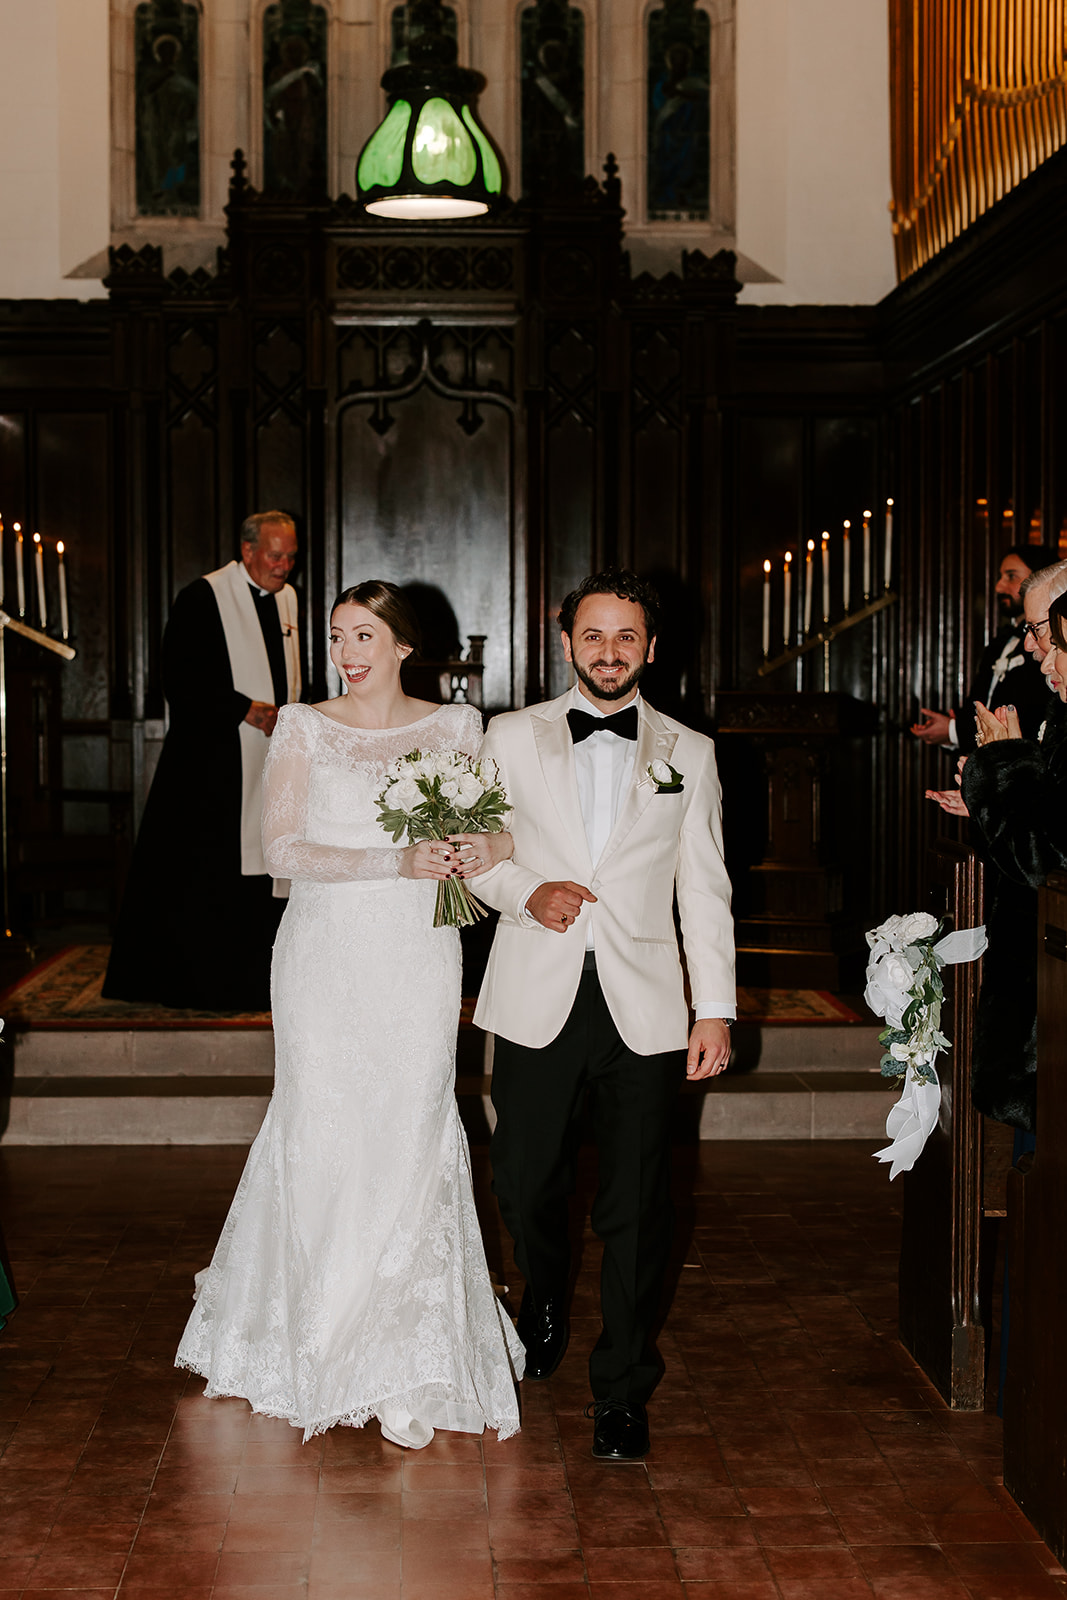 New husband and wife exit their dreamy Stevens estate wedding ceremony